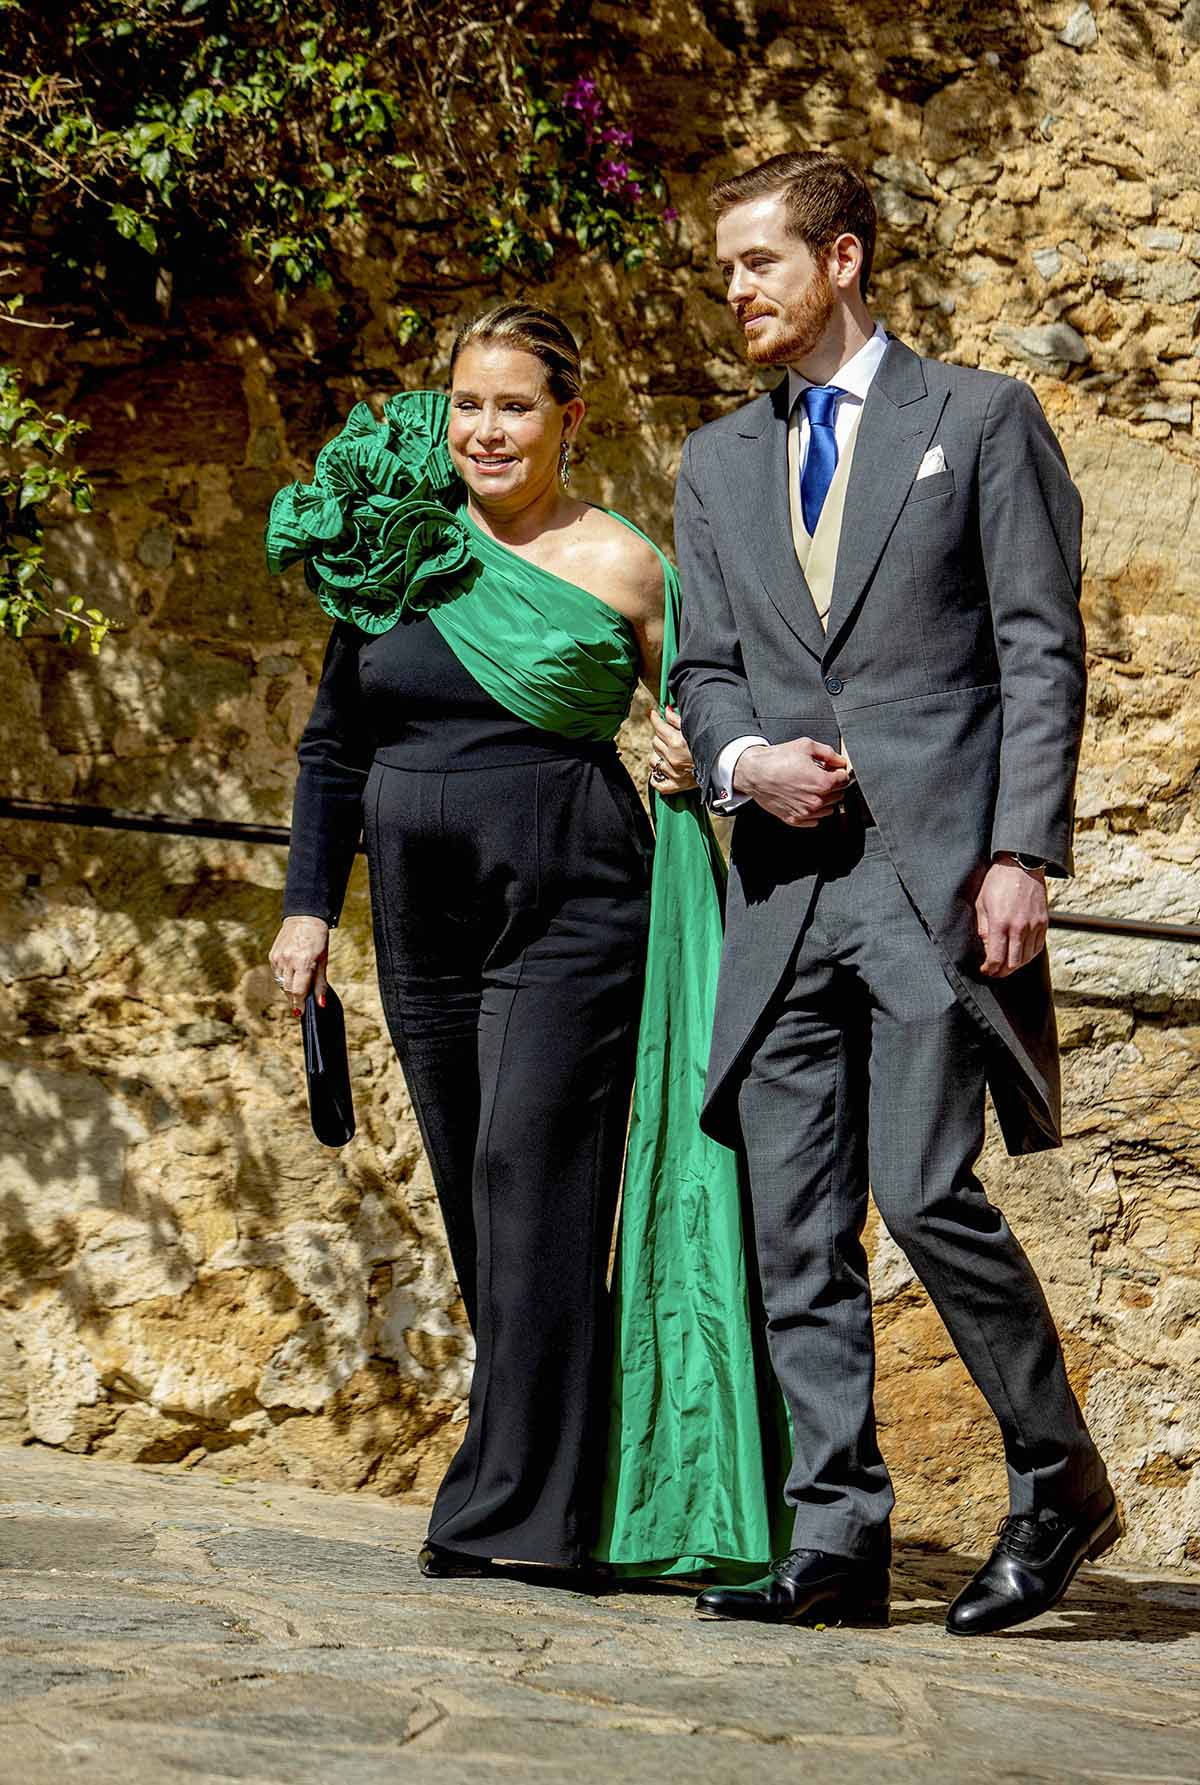 Grand Duchess Maria Teresa of Luxembourg and brother of the groom arrive a the Church Saint-Trophyme in Bormes-les-Mimosas, on April 29, 2023, to attend the Wedding of Princess Alexandra of Luxembourg and Mr. Nicolas Bagory Photo: Albert Nieboer / Netherlands OUT / Point de Vue OUT